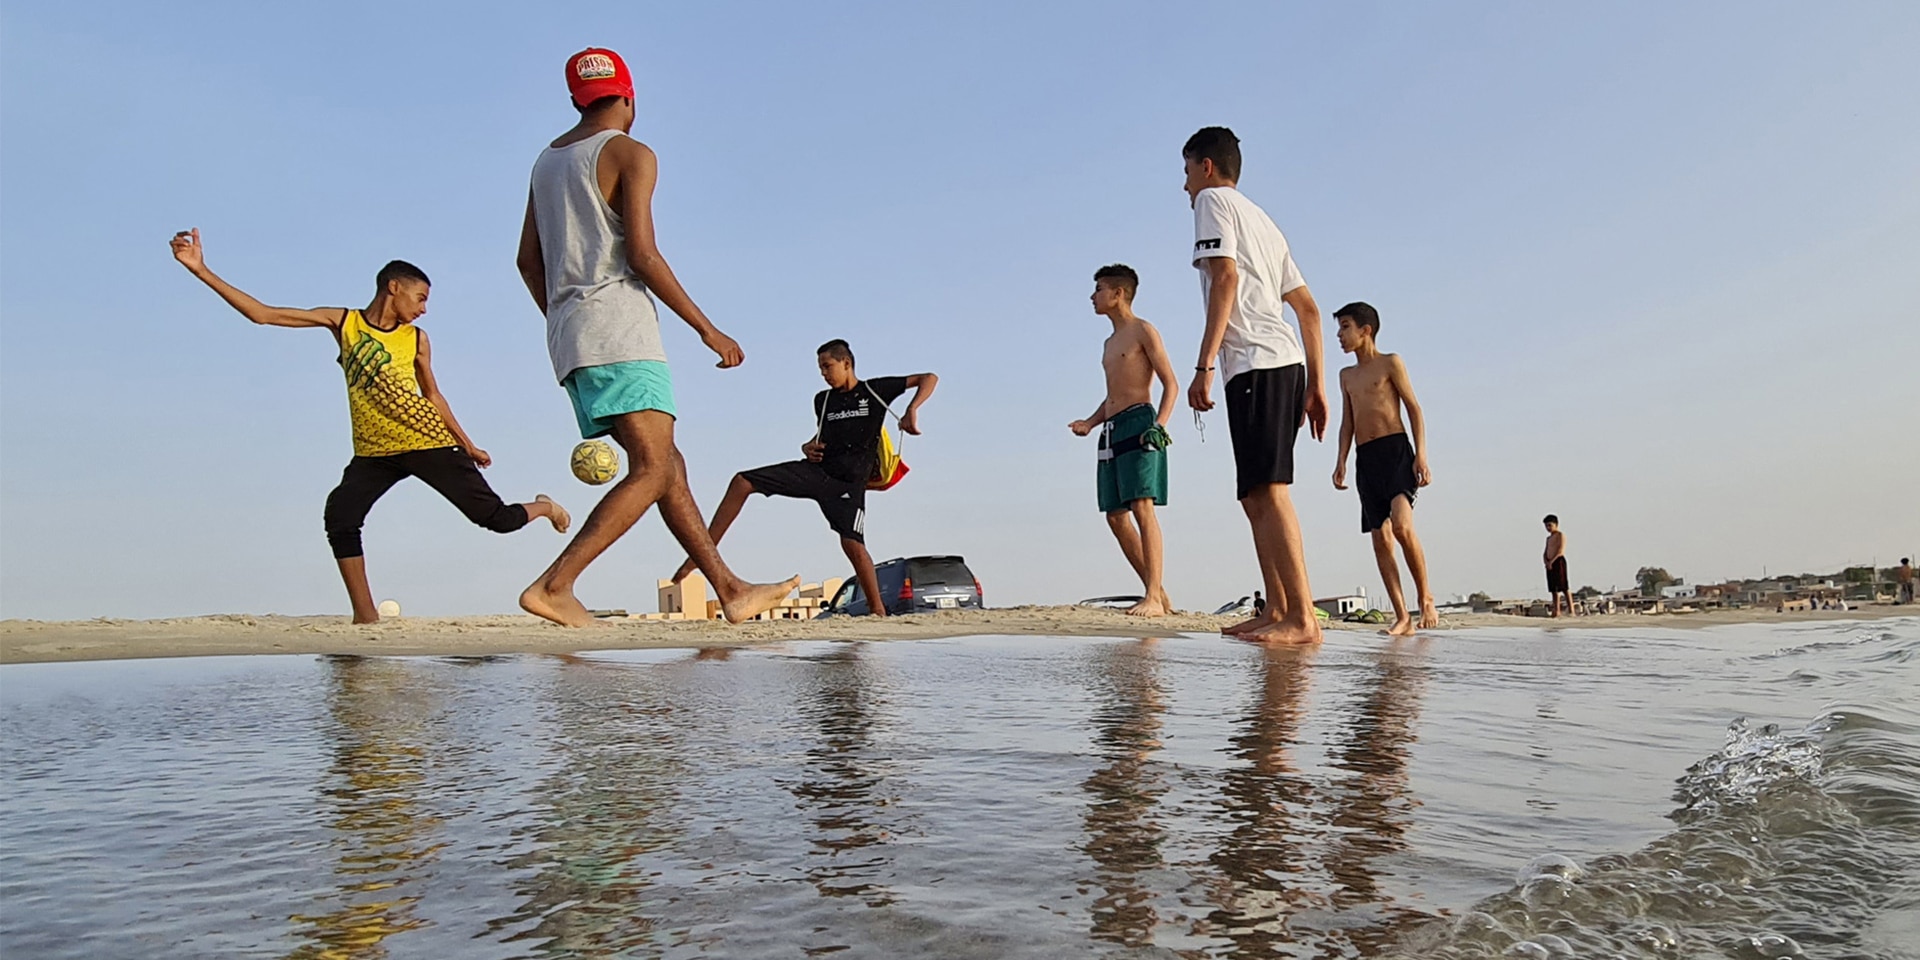 Young people play football on a beach in the town of Garabulli, about 70 km from the capital Tripoli.